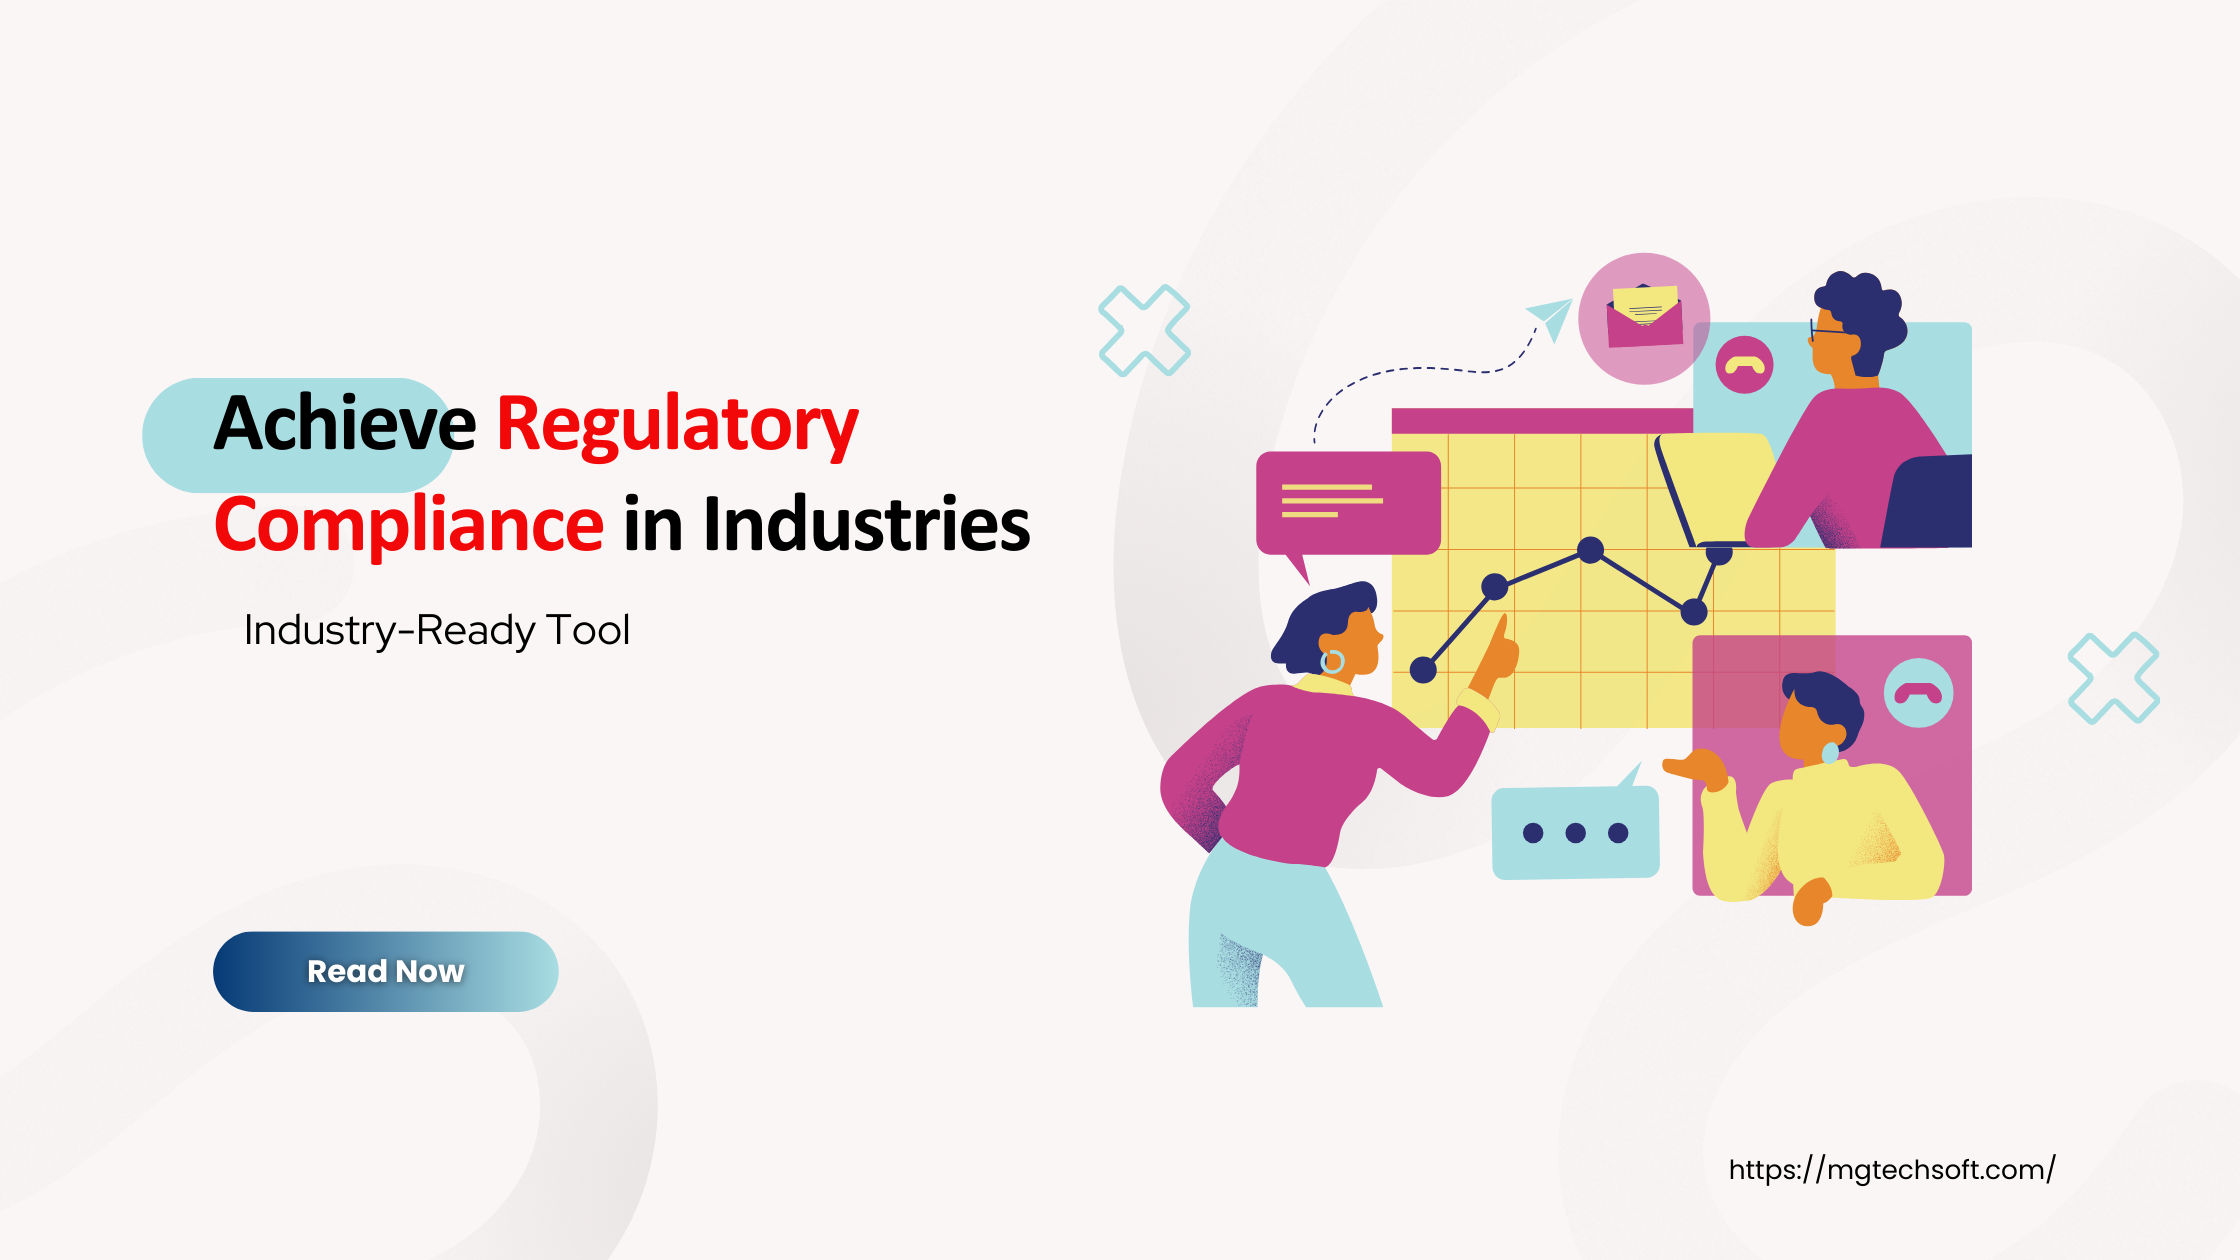 Efficient Tools for Achieving Regulatory Compliance in Industries